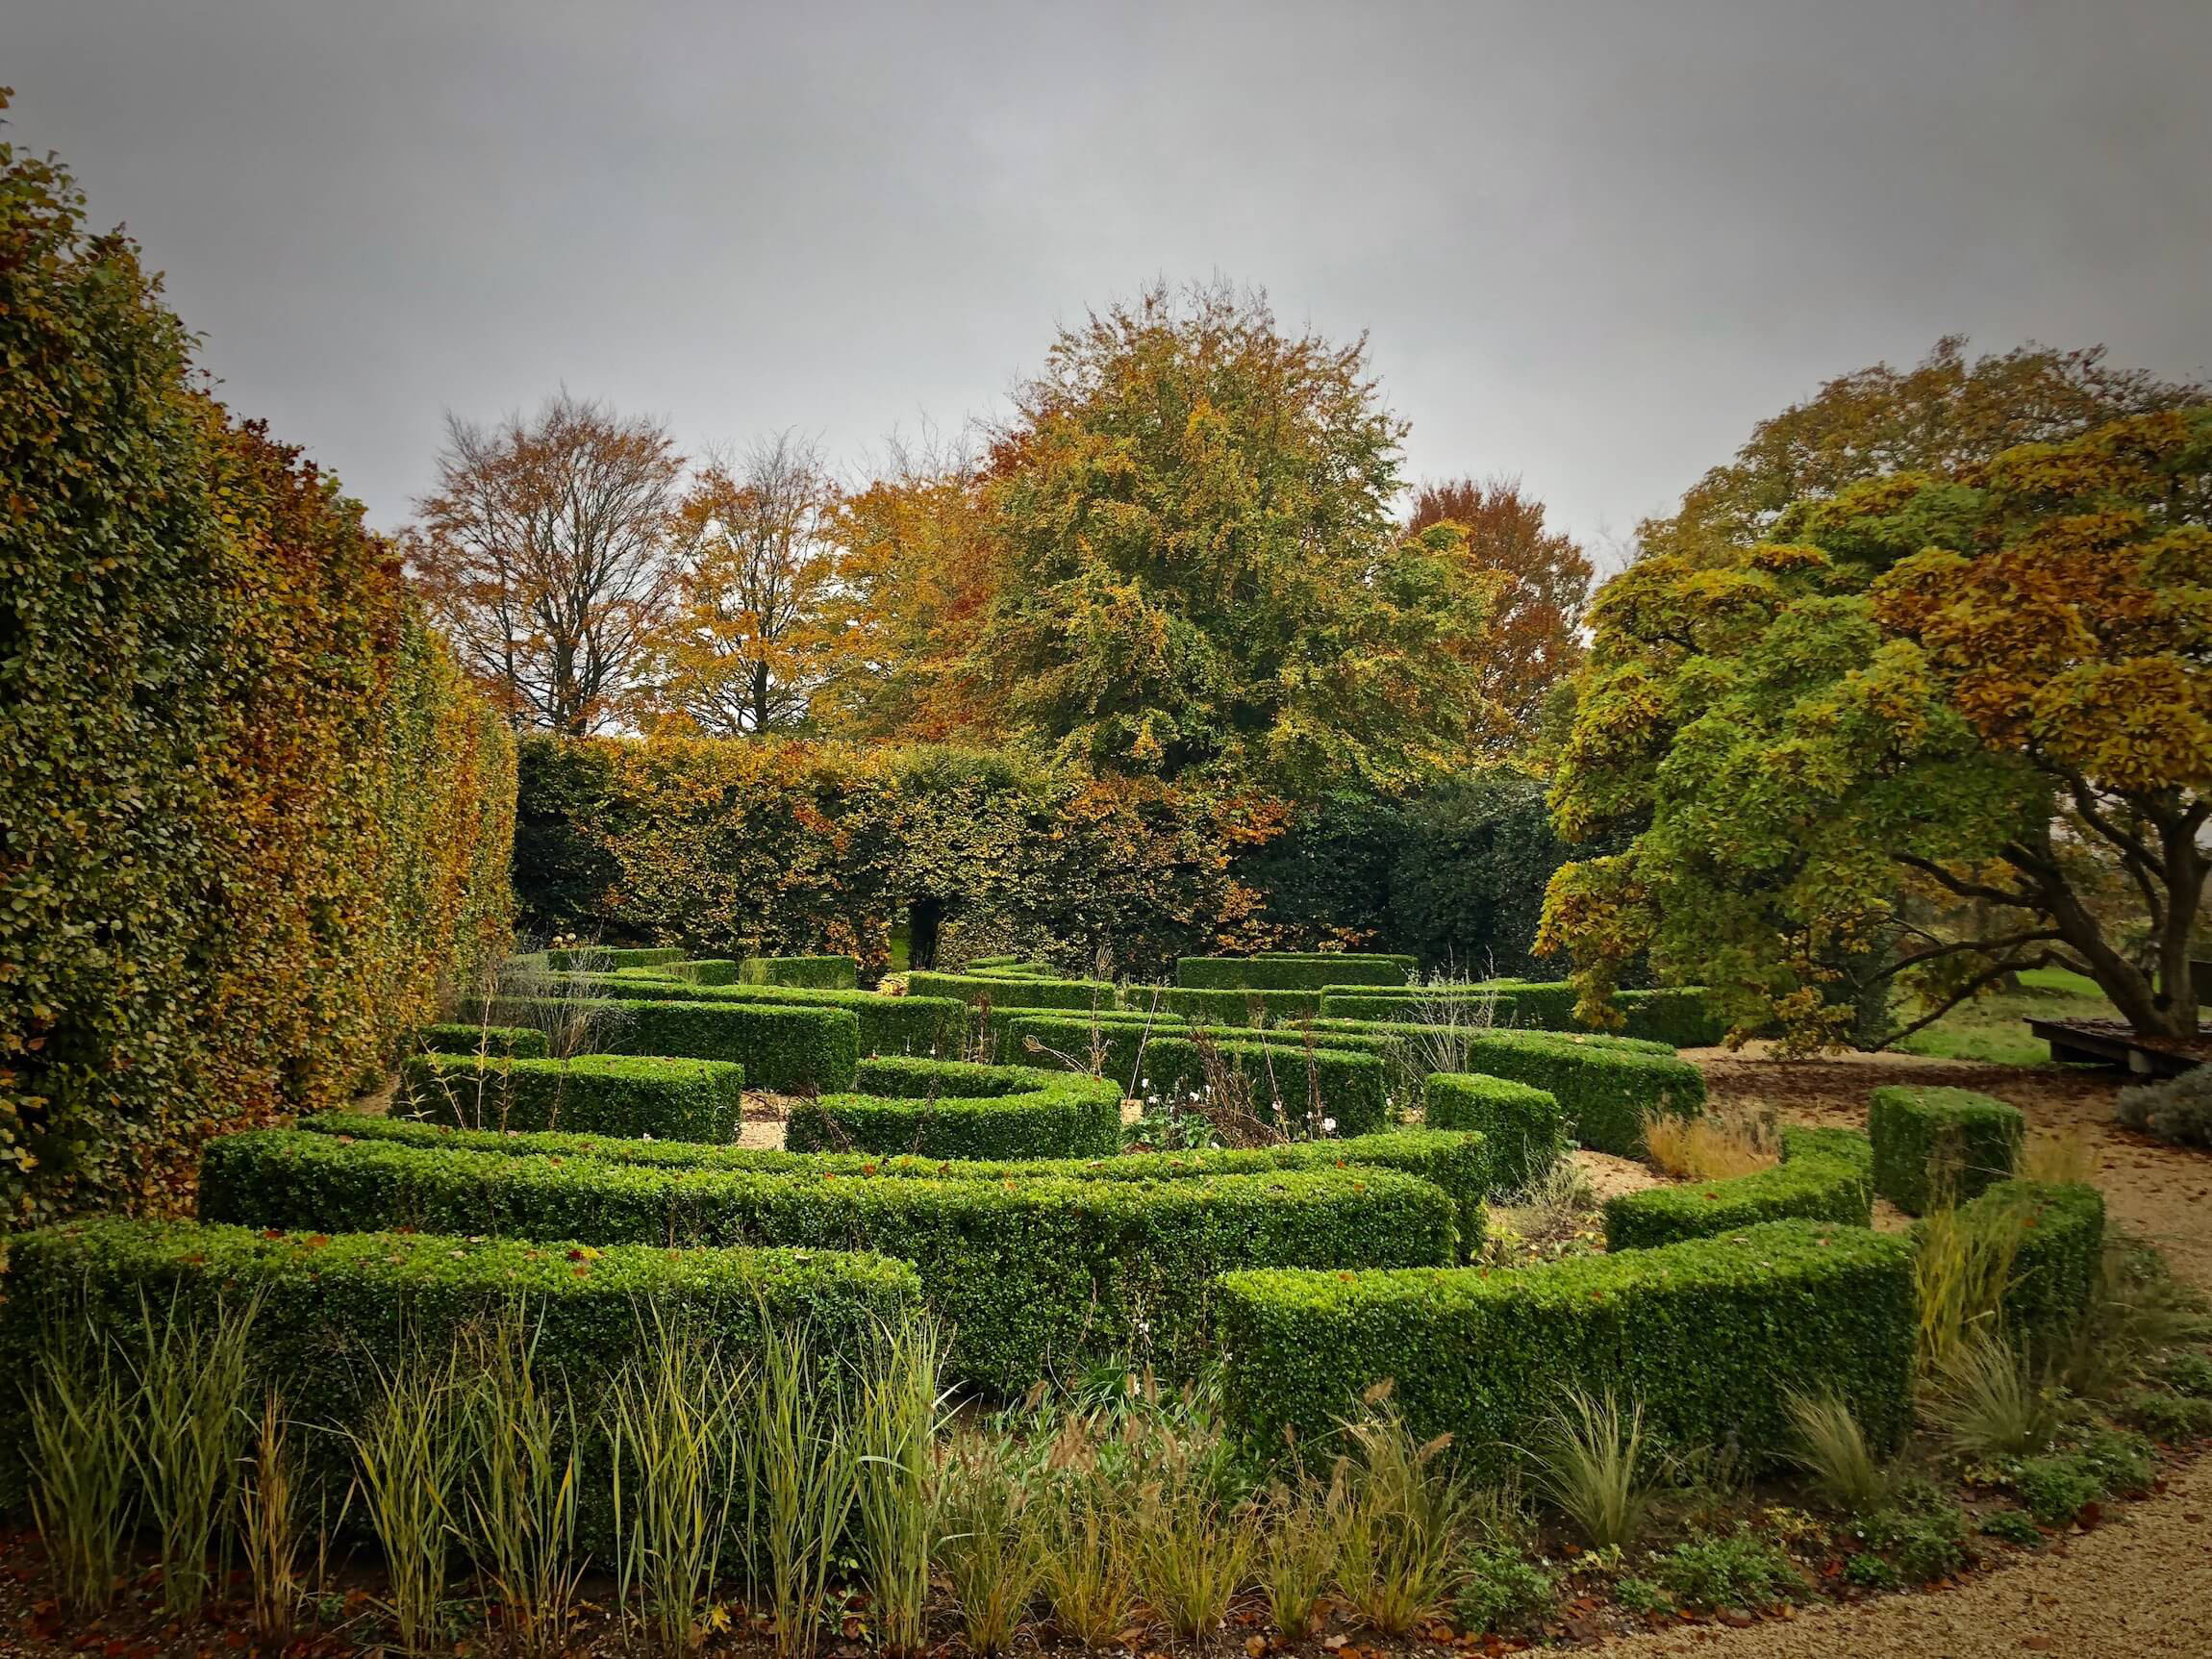 natural walled garden in Kingham go Beech with swirly buxus parterre and autumn colour